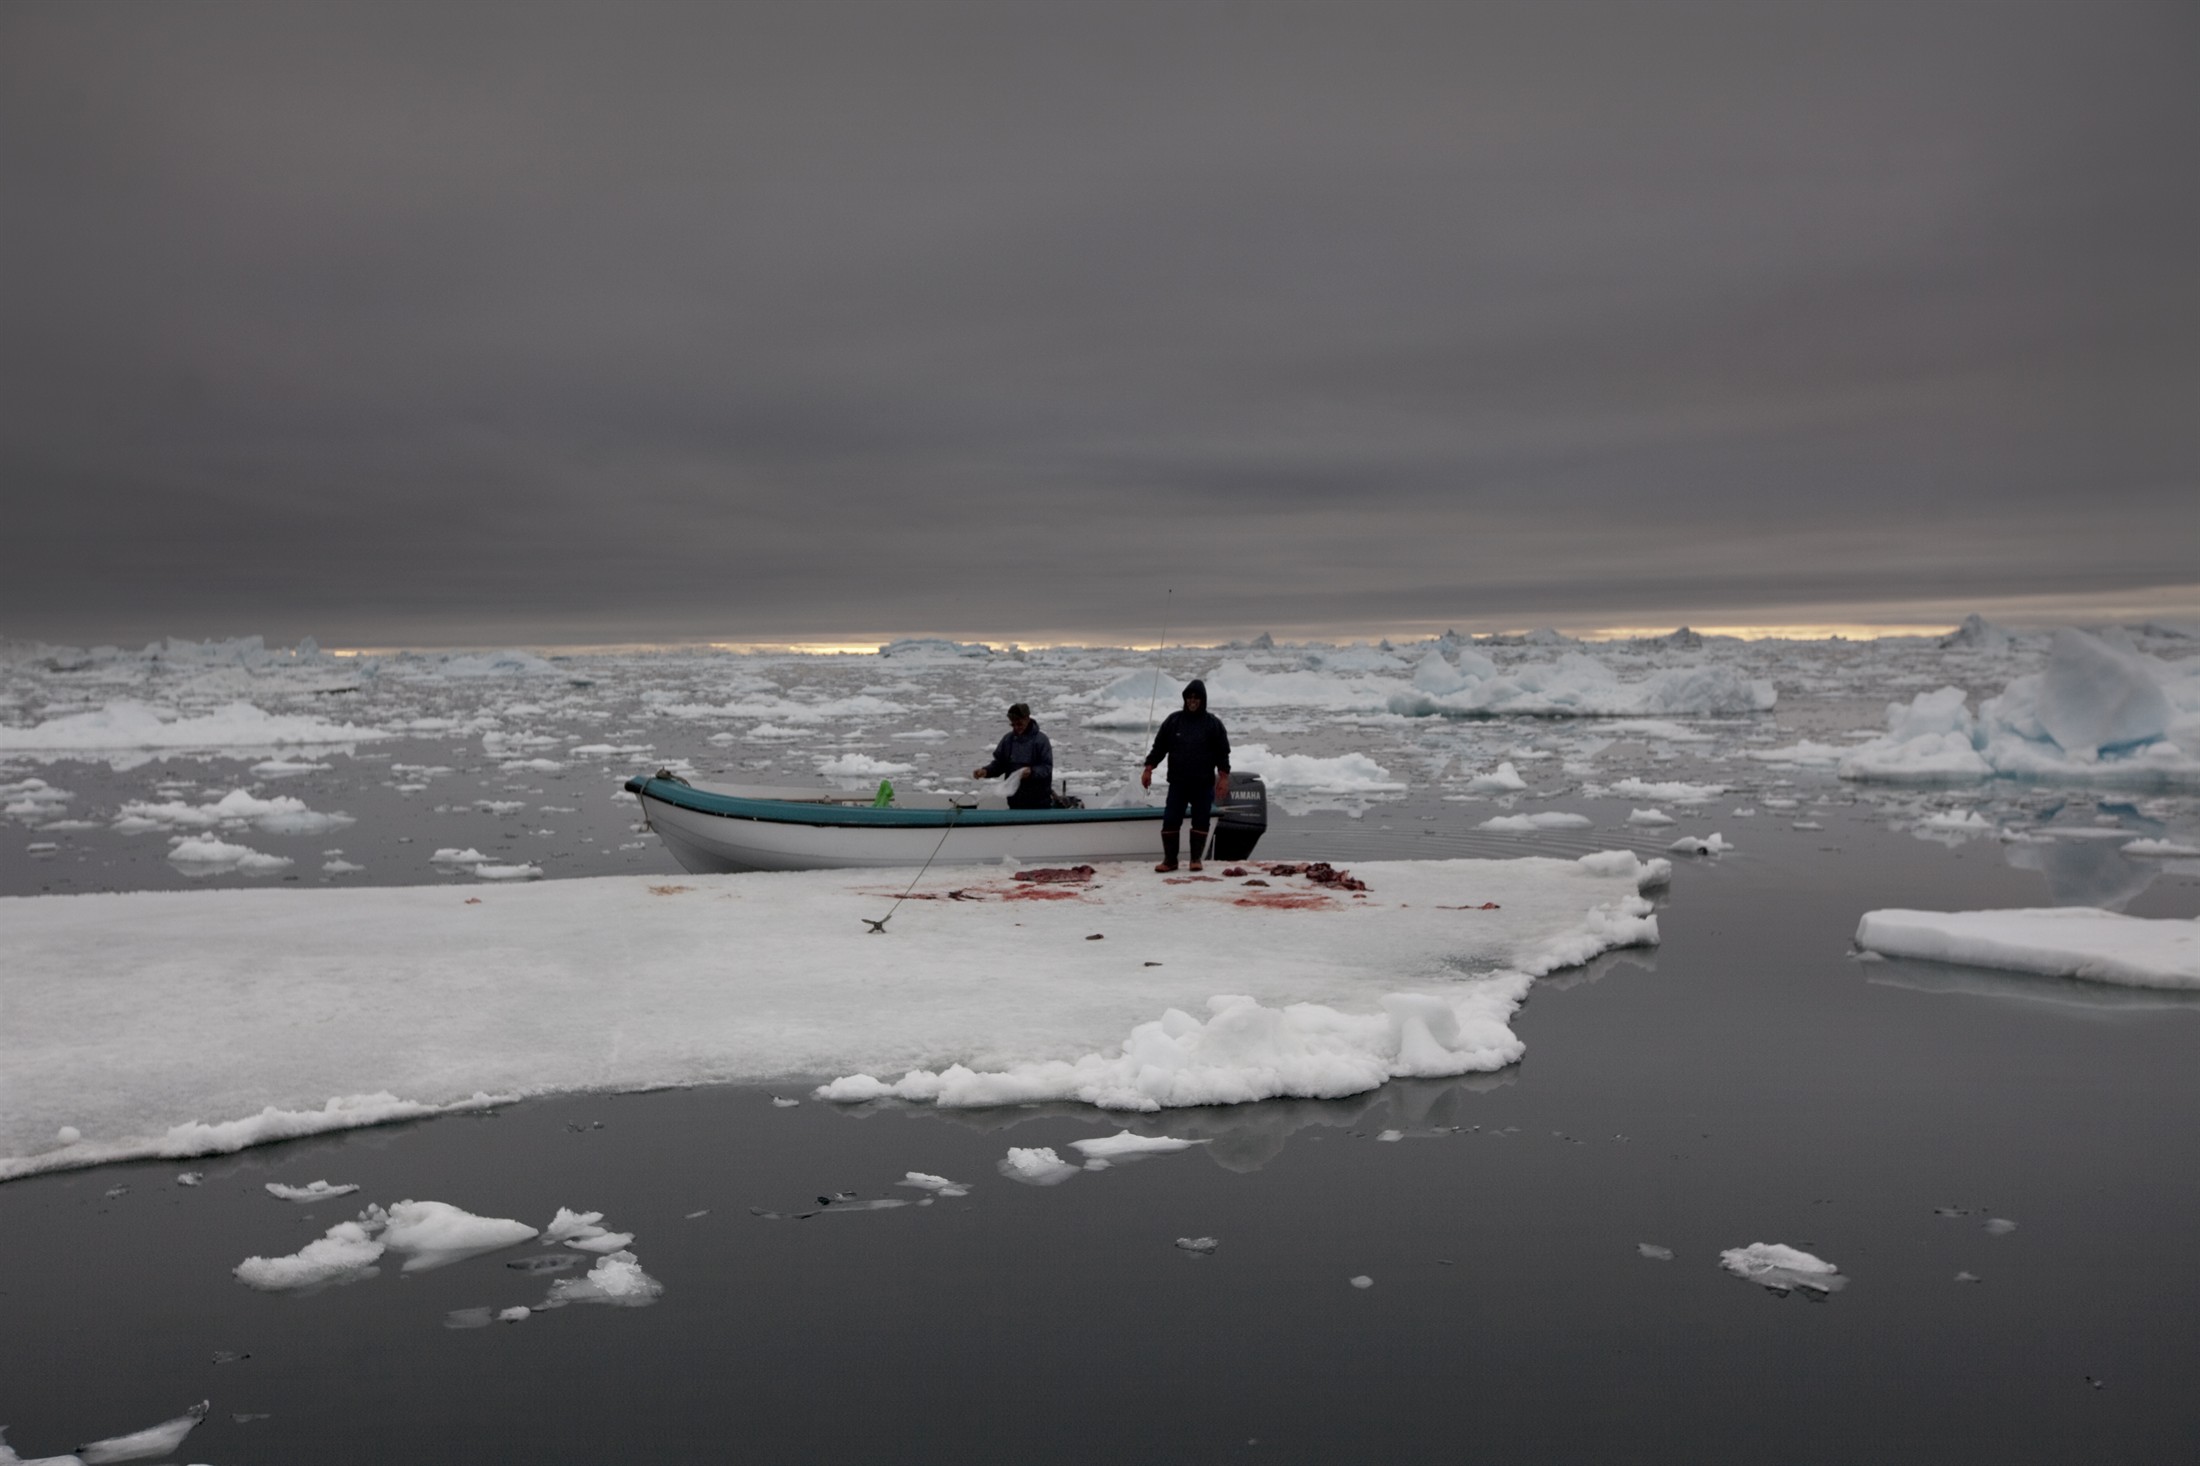 Sealhunting in the arctic